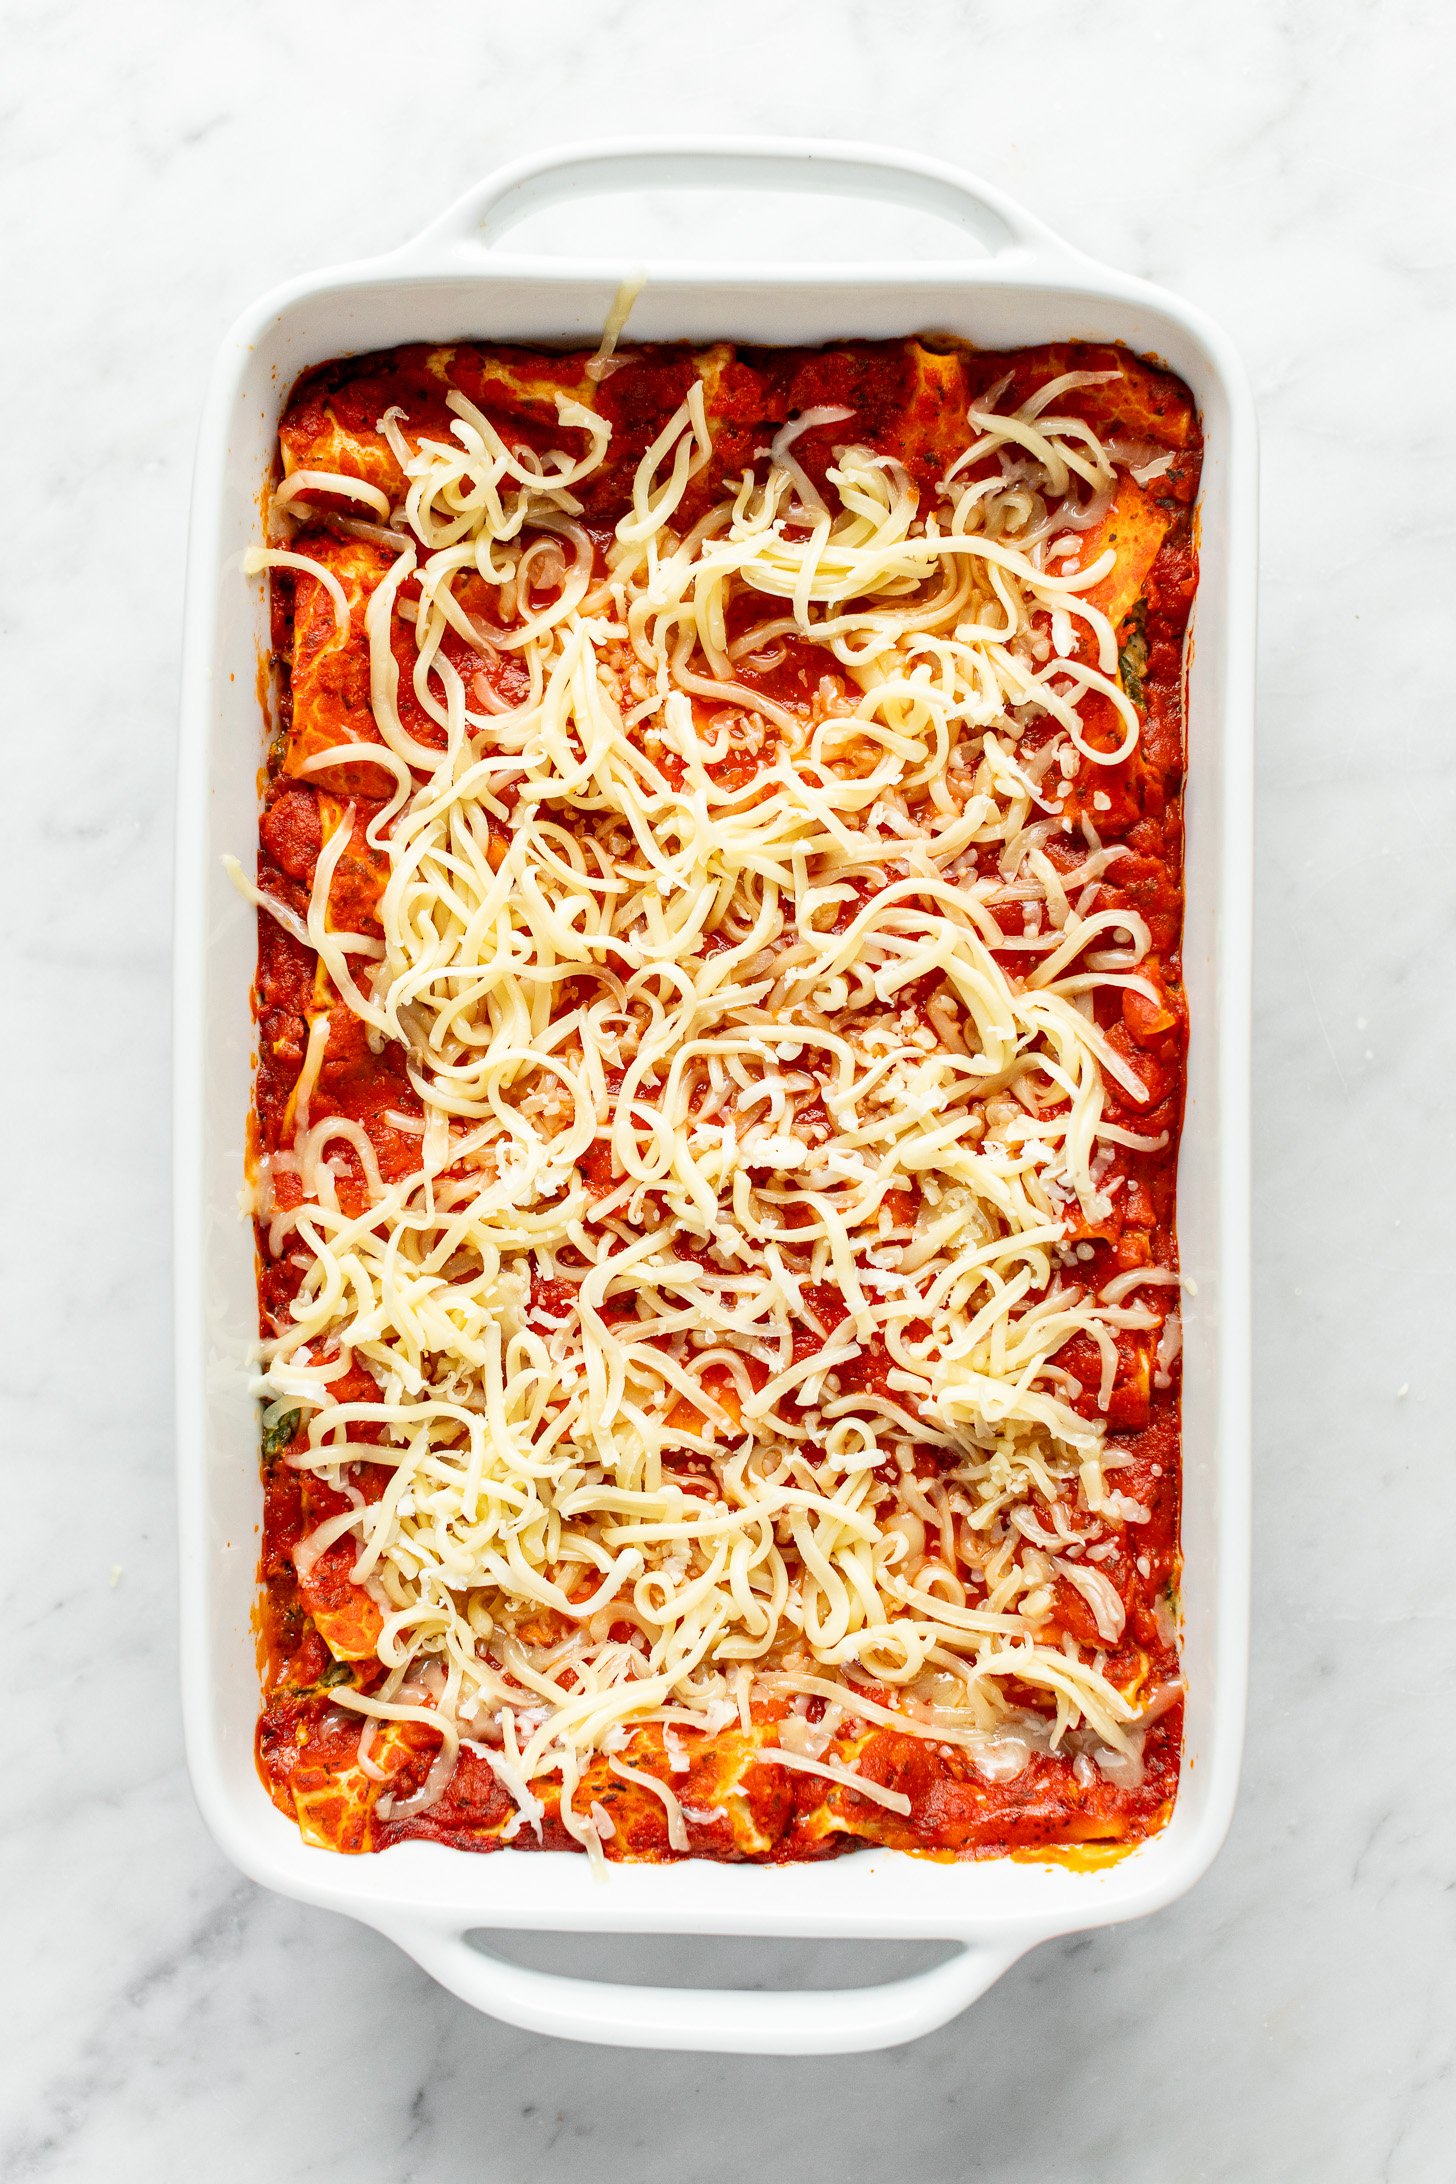 Shredded mozzarella cheese is sitting on top of cooked lasagna in a white baking dish.